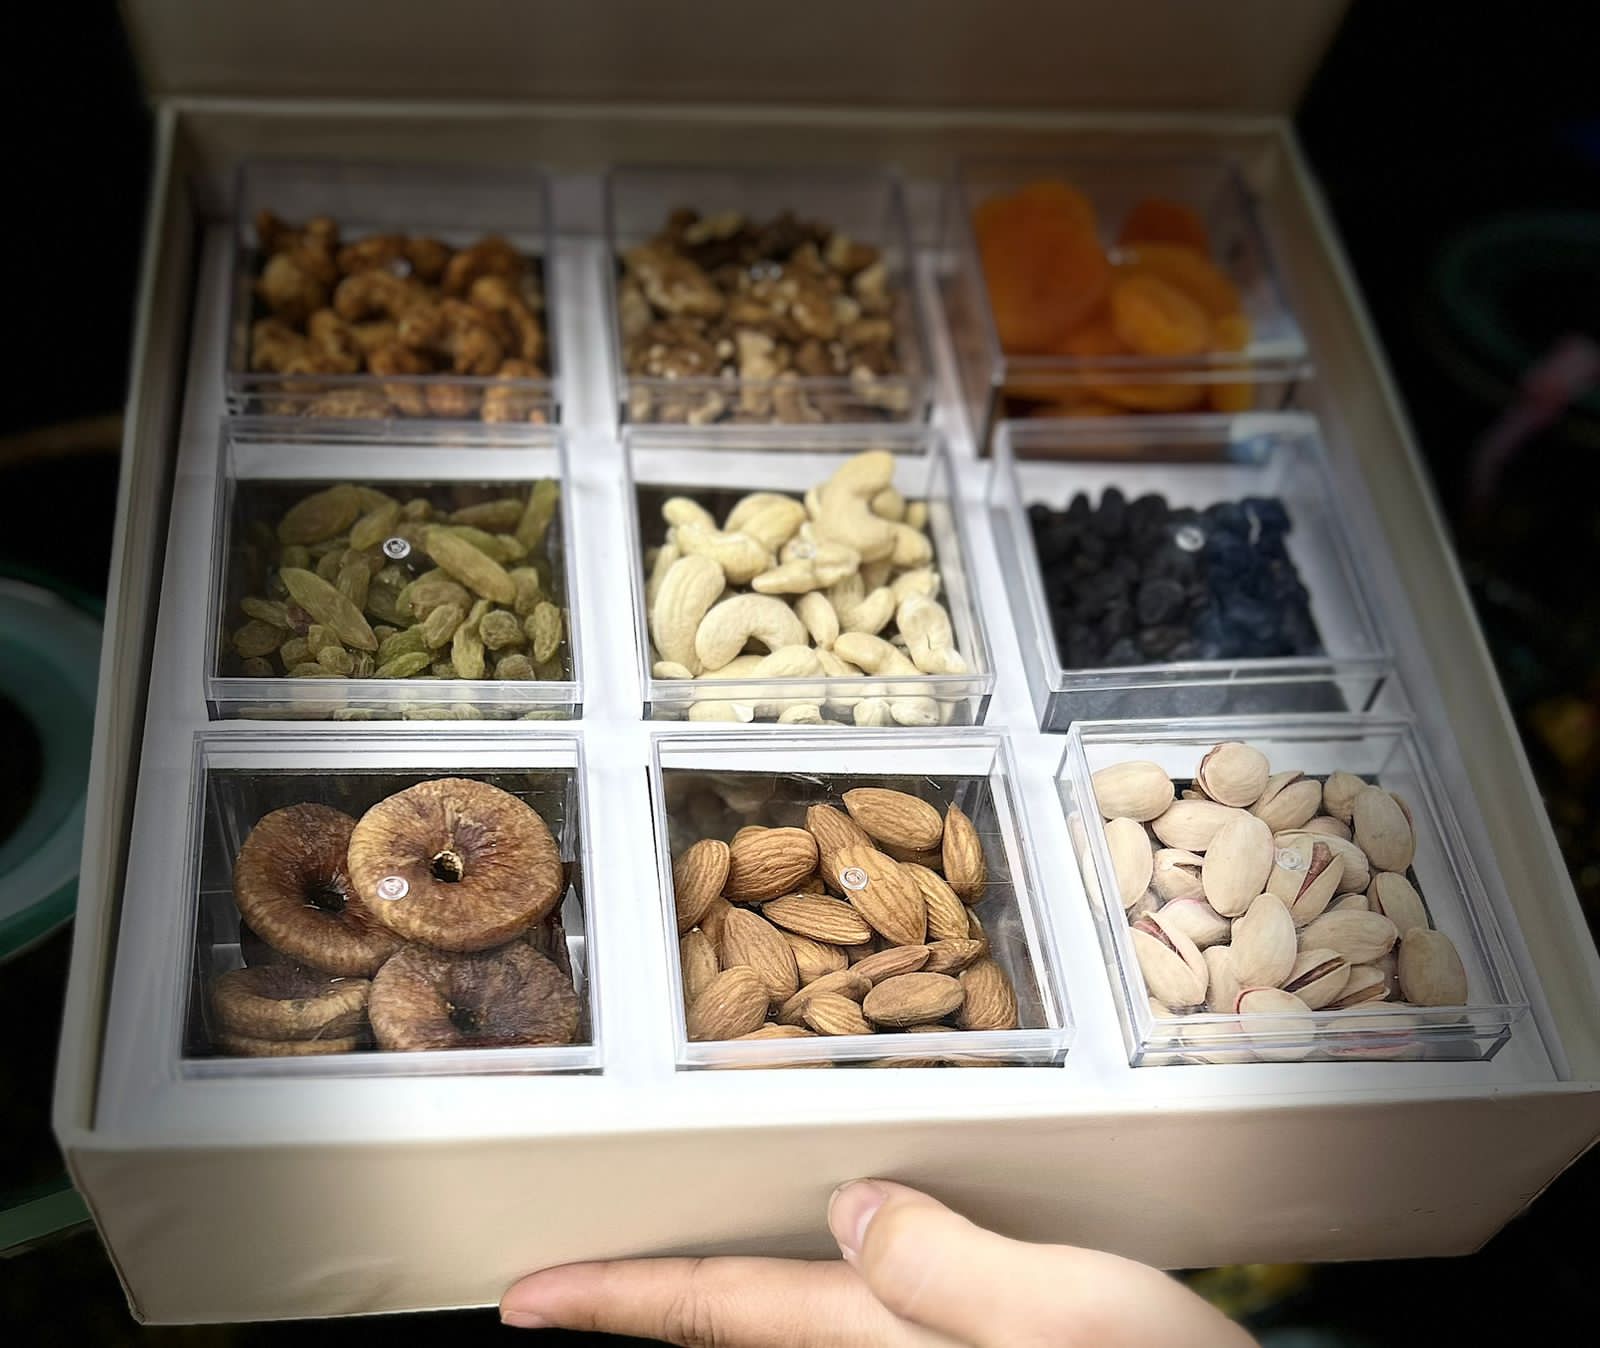 Buy our thoughtful dried fruit and nuts gift tray at broadwaybasketeers.com